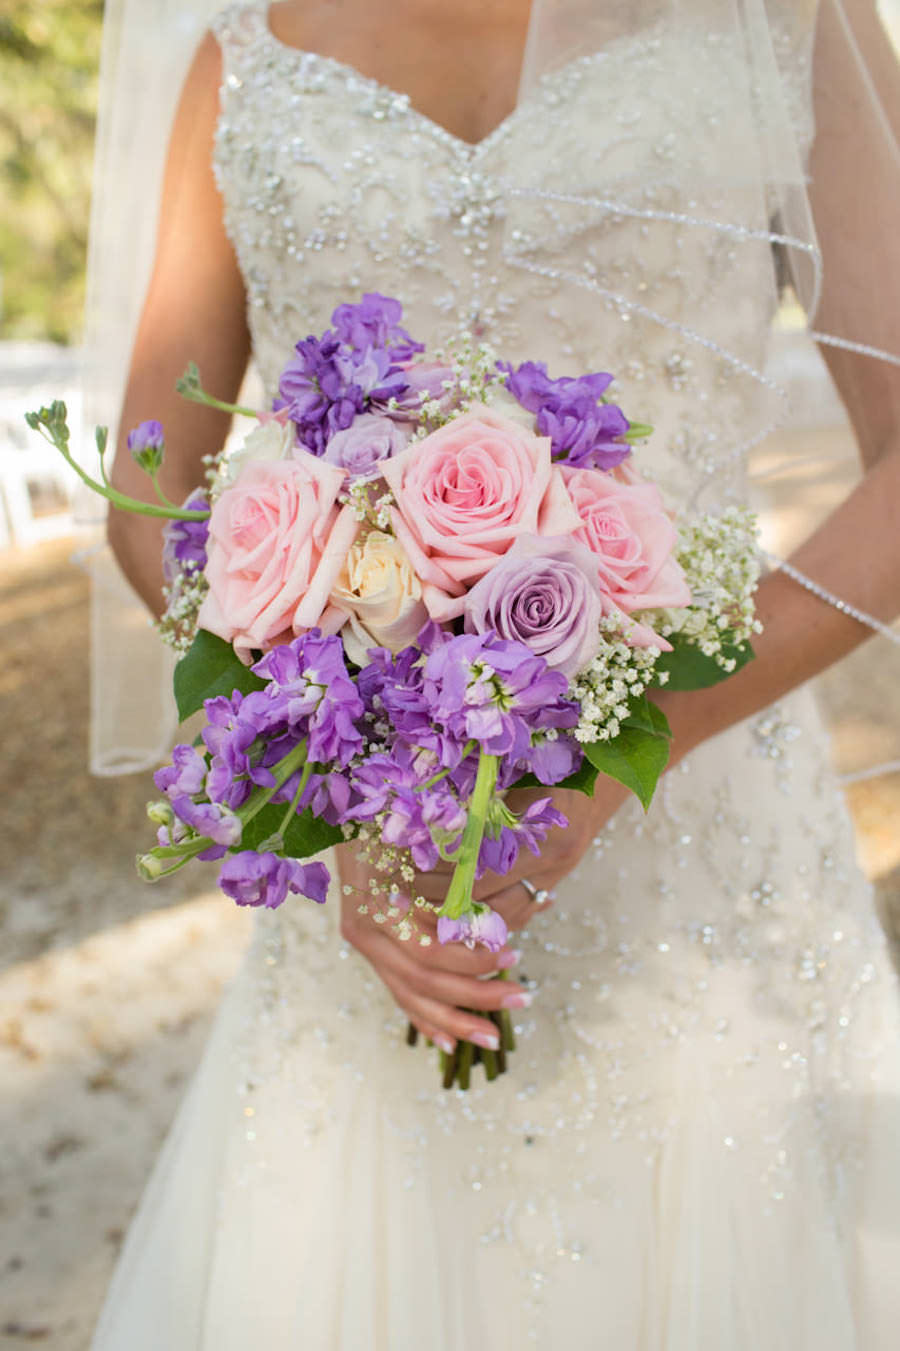 Bridal Wedding Portrait in Ivory, Beaded Lace Wedding Dress and Pink and Purple Bouquet of Flowers